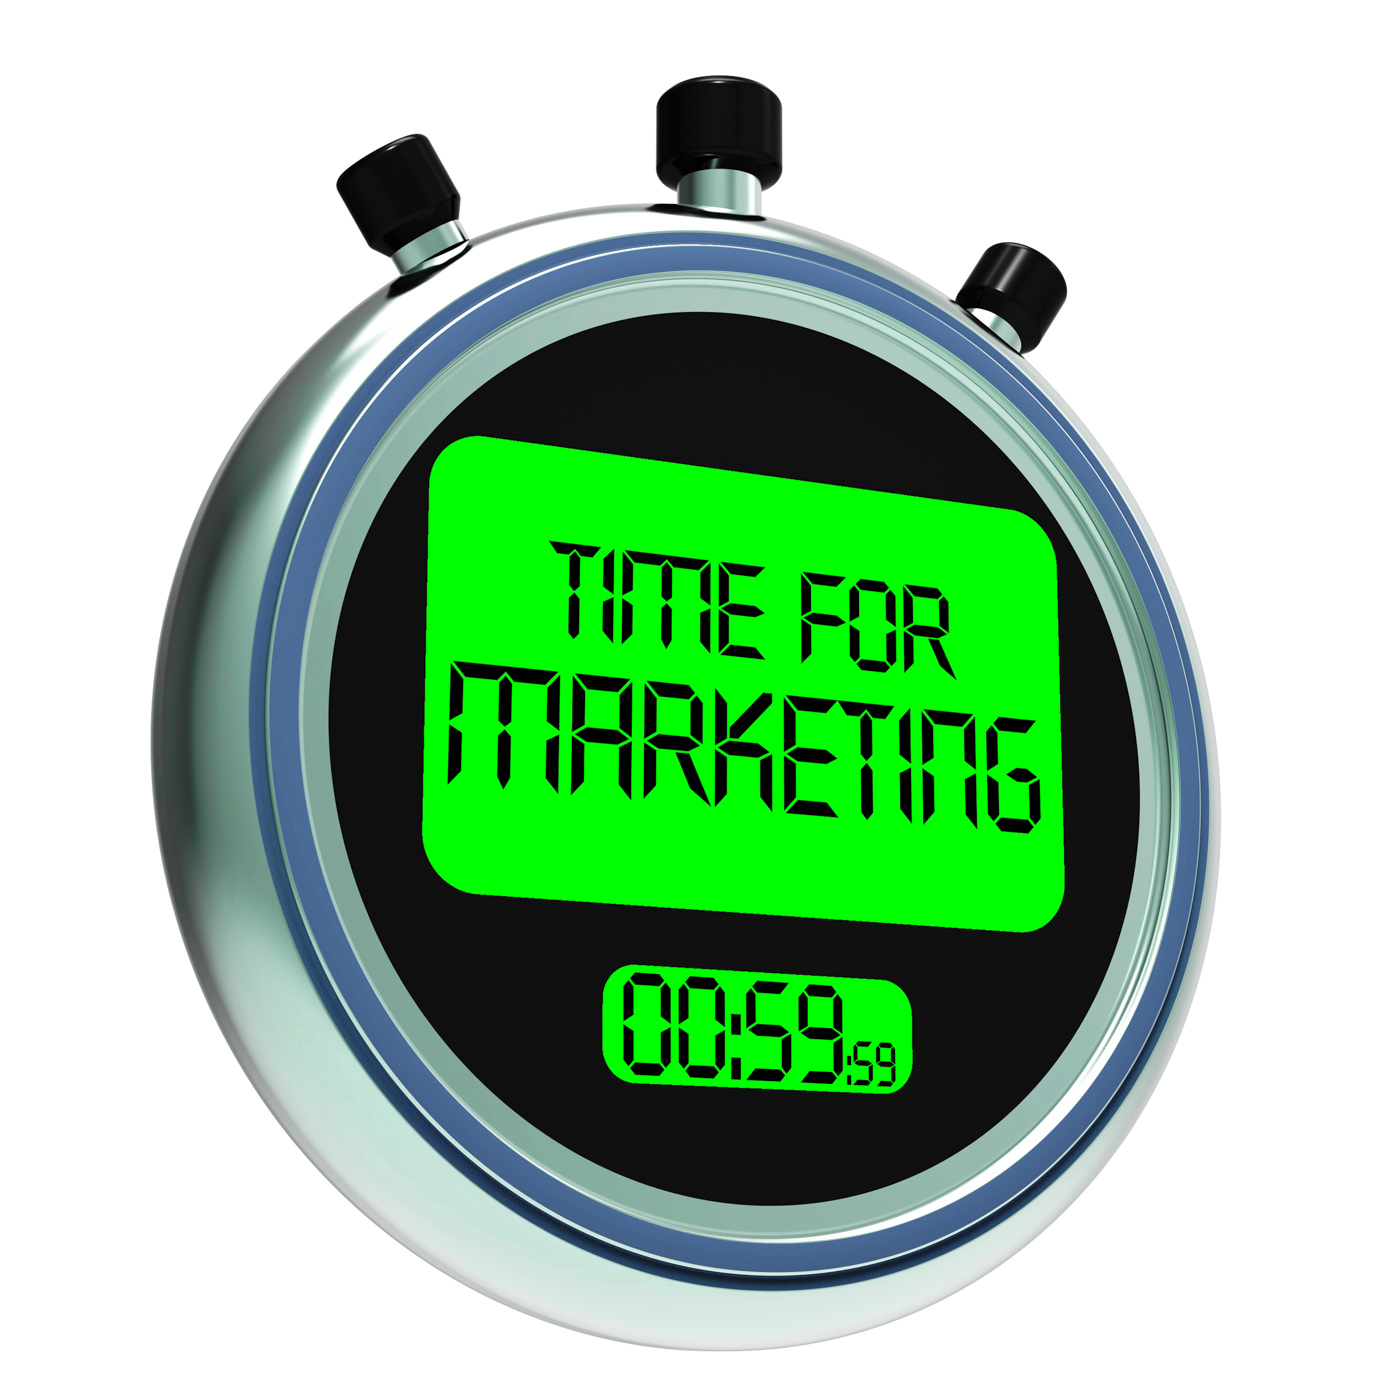 Time for marketing message means advertising and sales photo